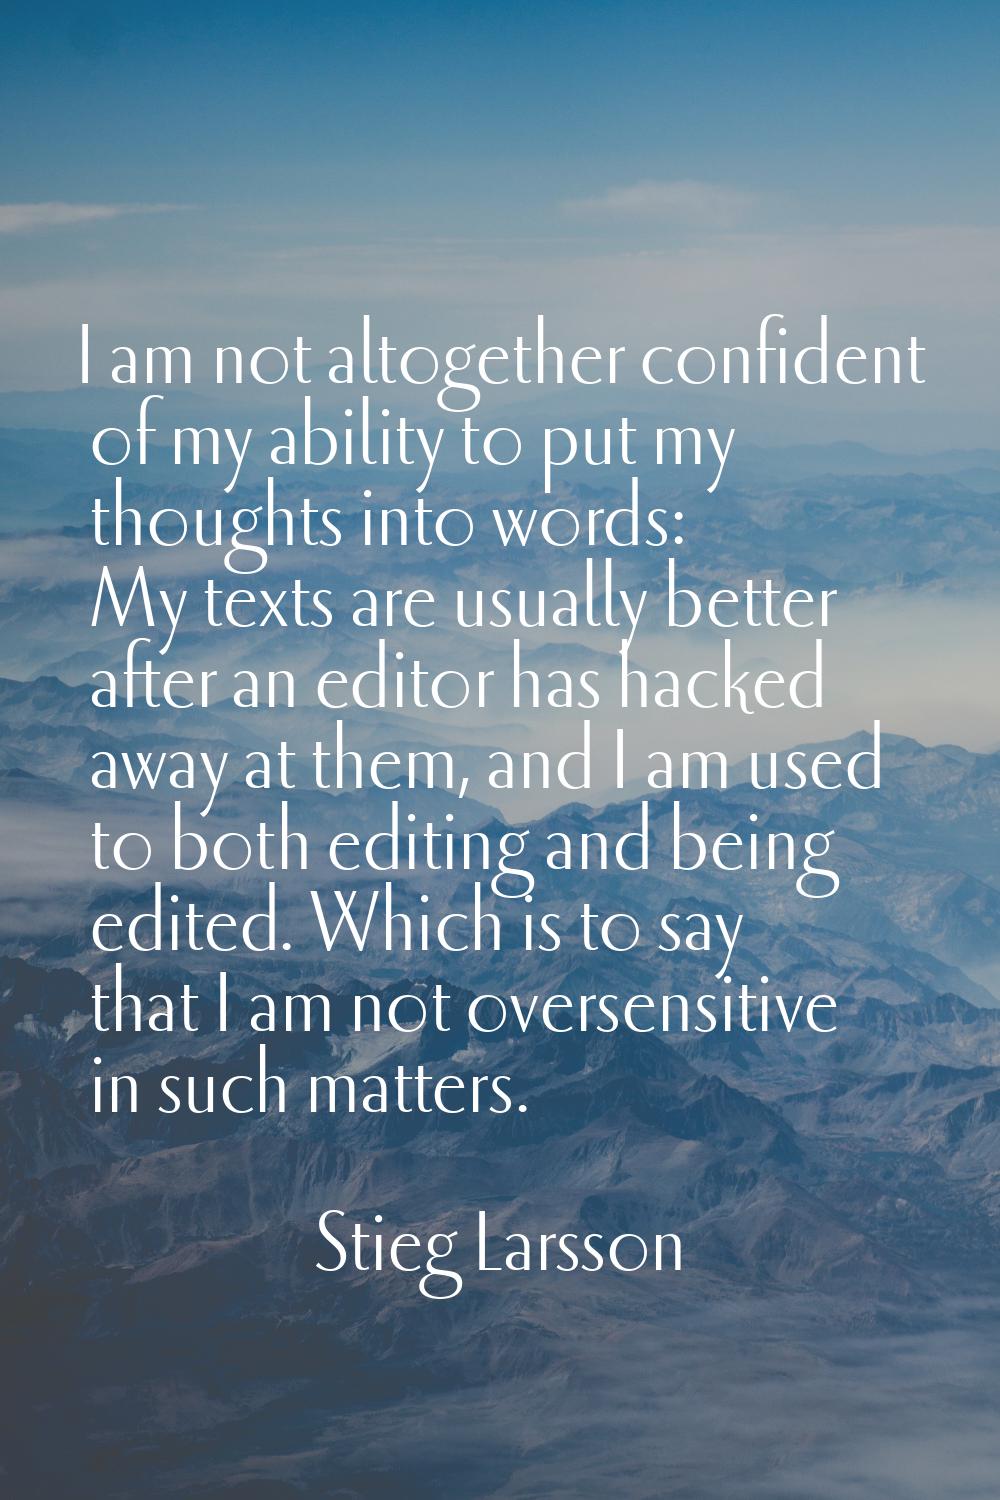 I am not altogether confident of my ability to put my thoughts into words: My texts are usually bet